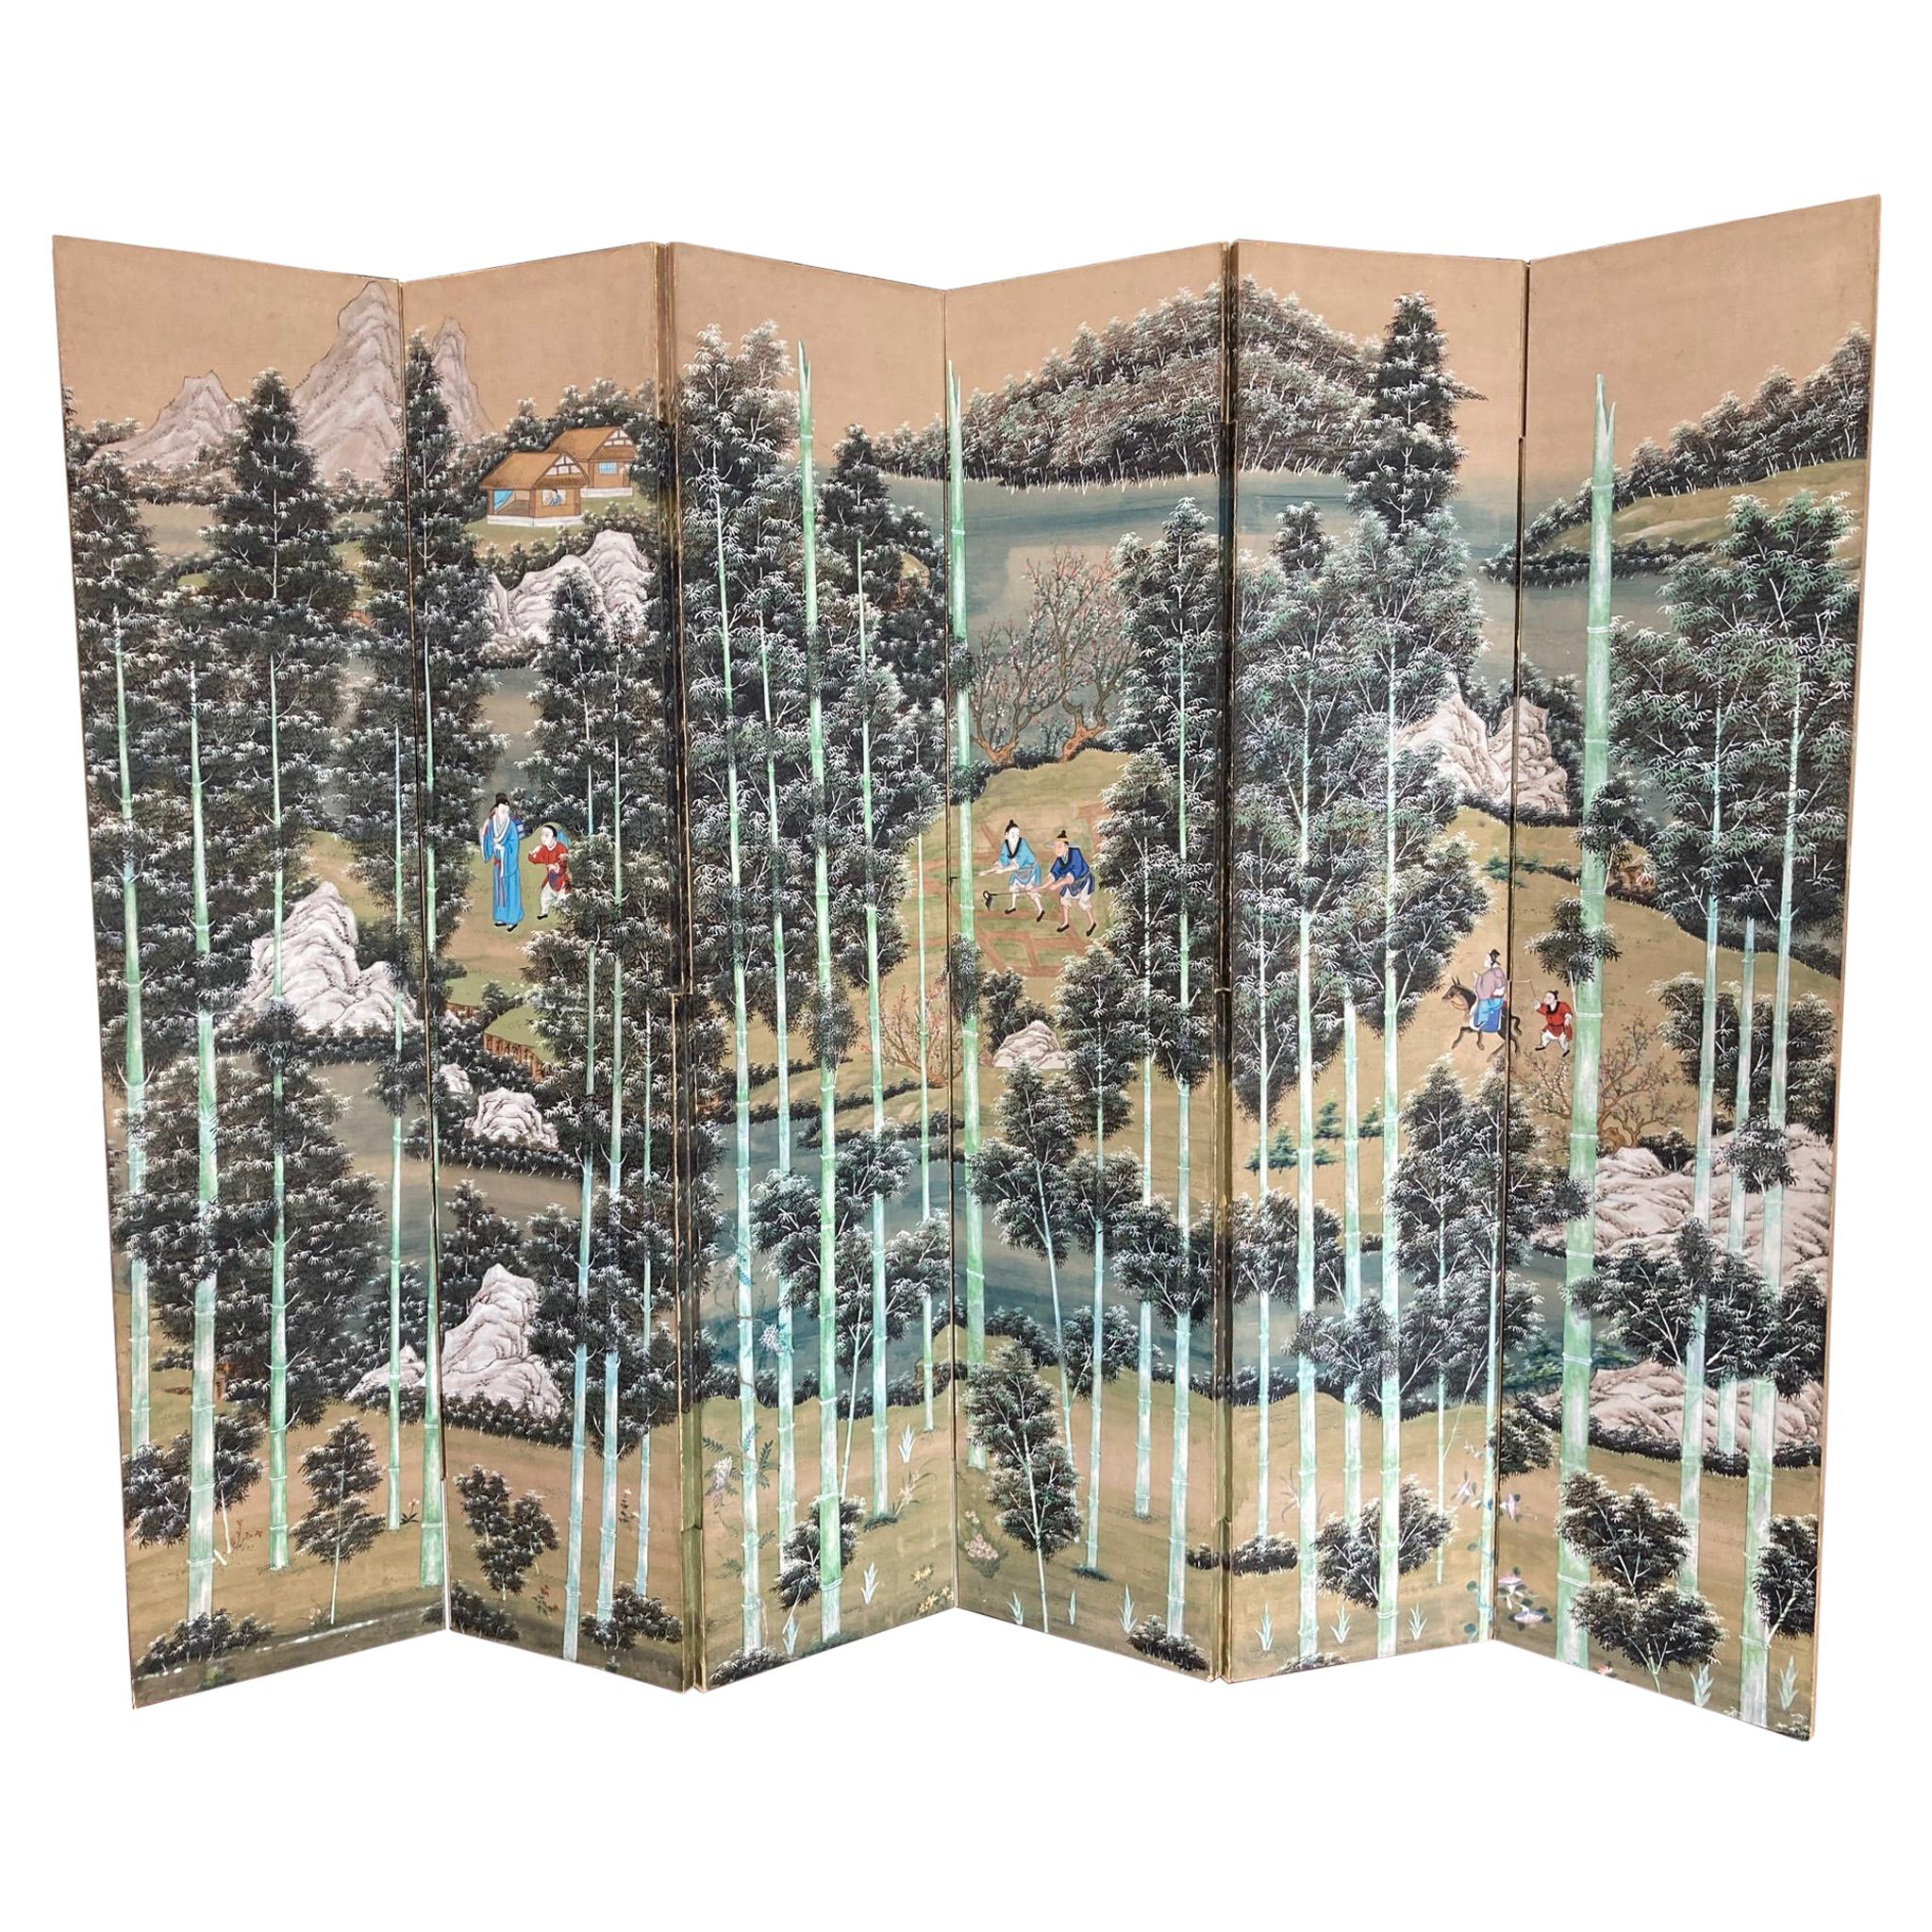 Chinese Painted Screen with Bamboo Forest and Figures, Large Scale